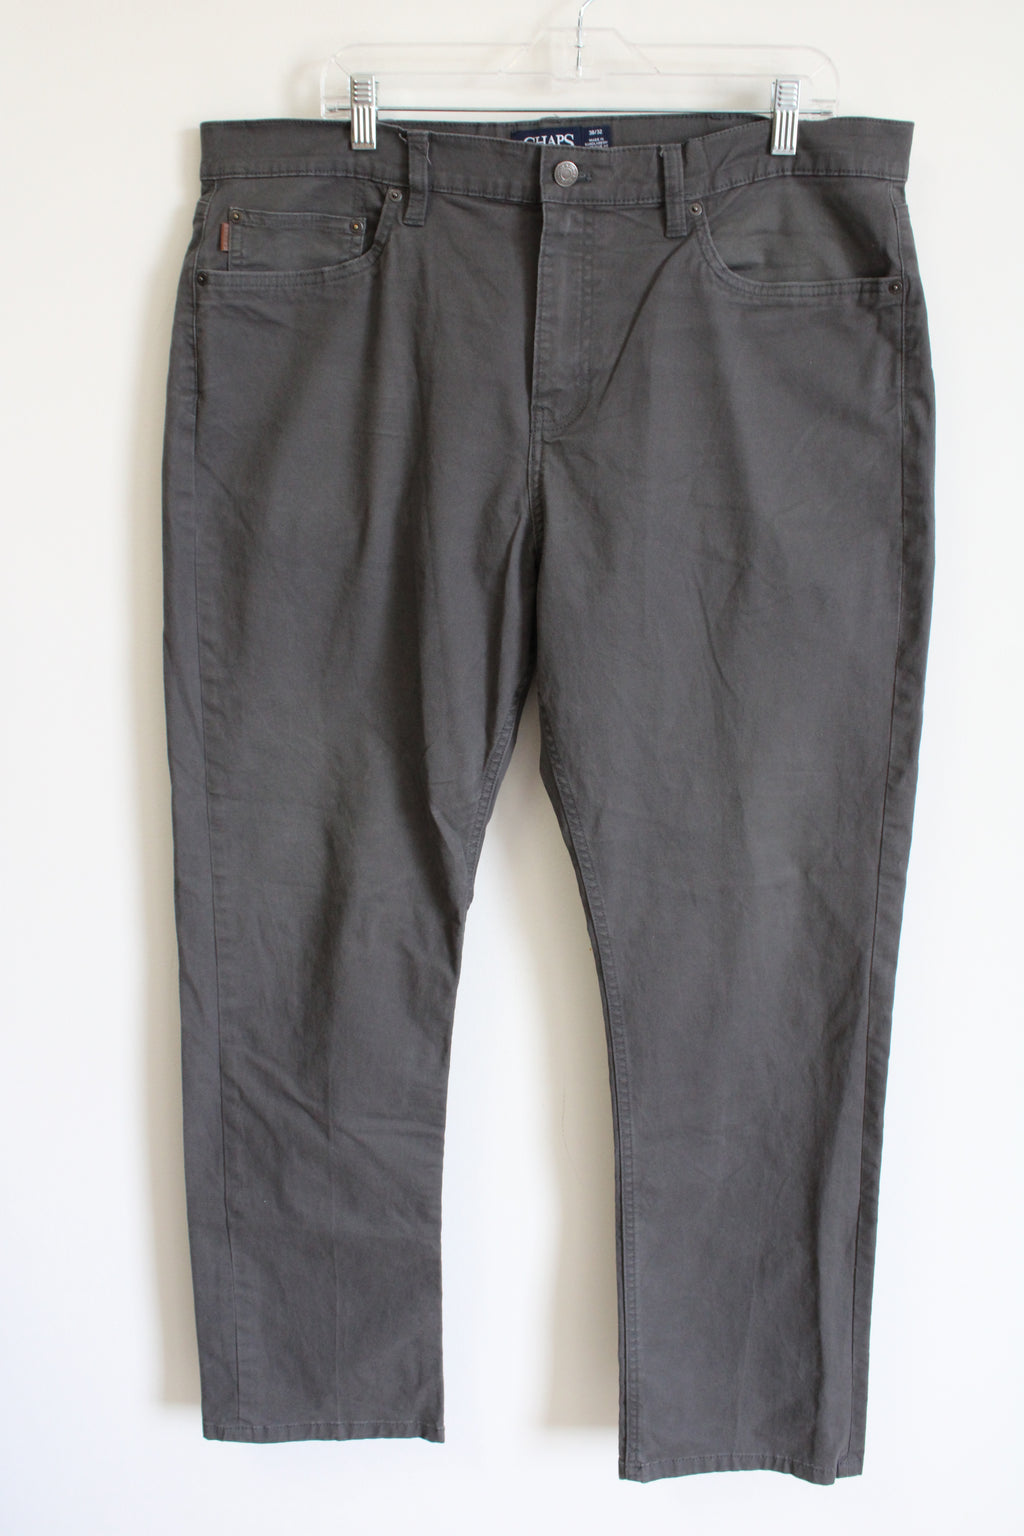 Chaps Straight Fit Gray Pants | 38x32